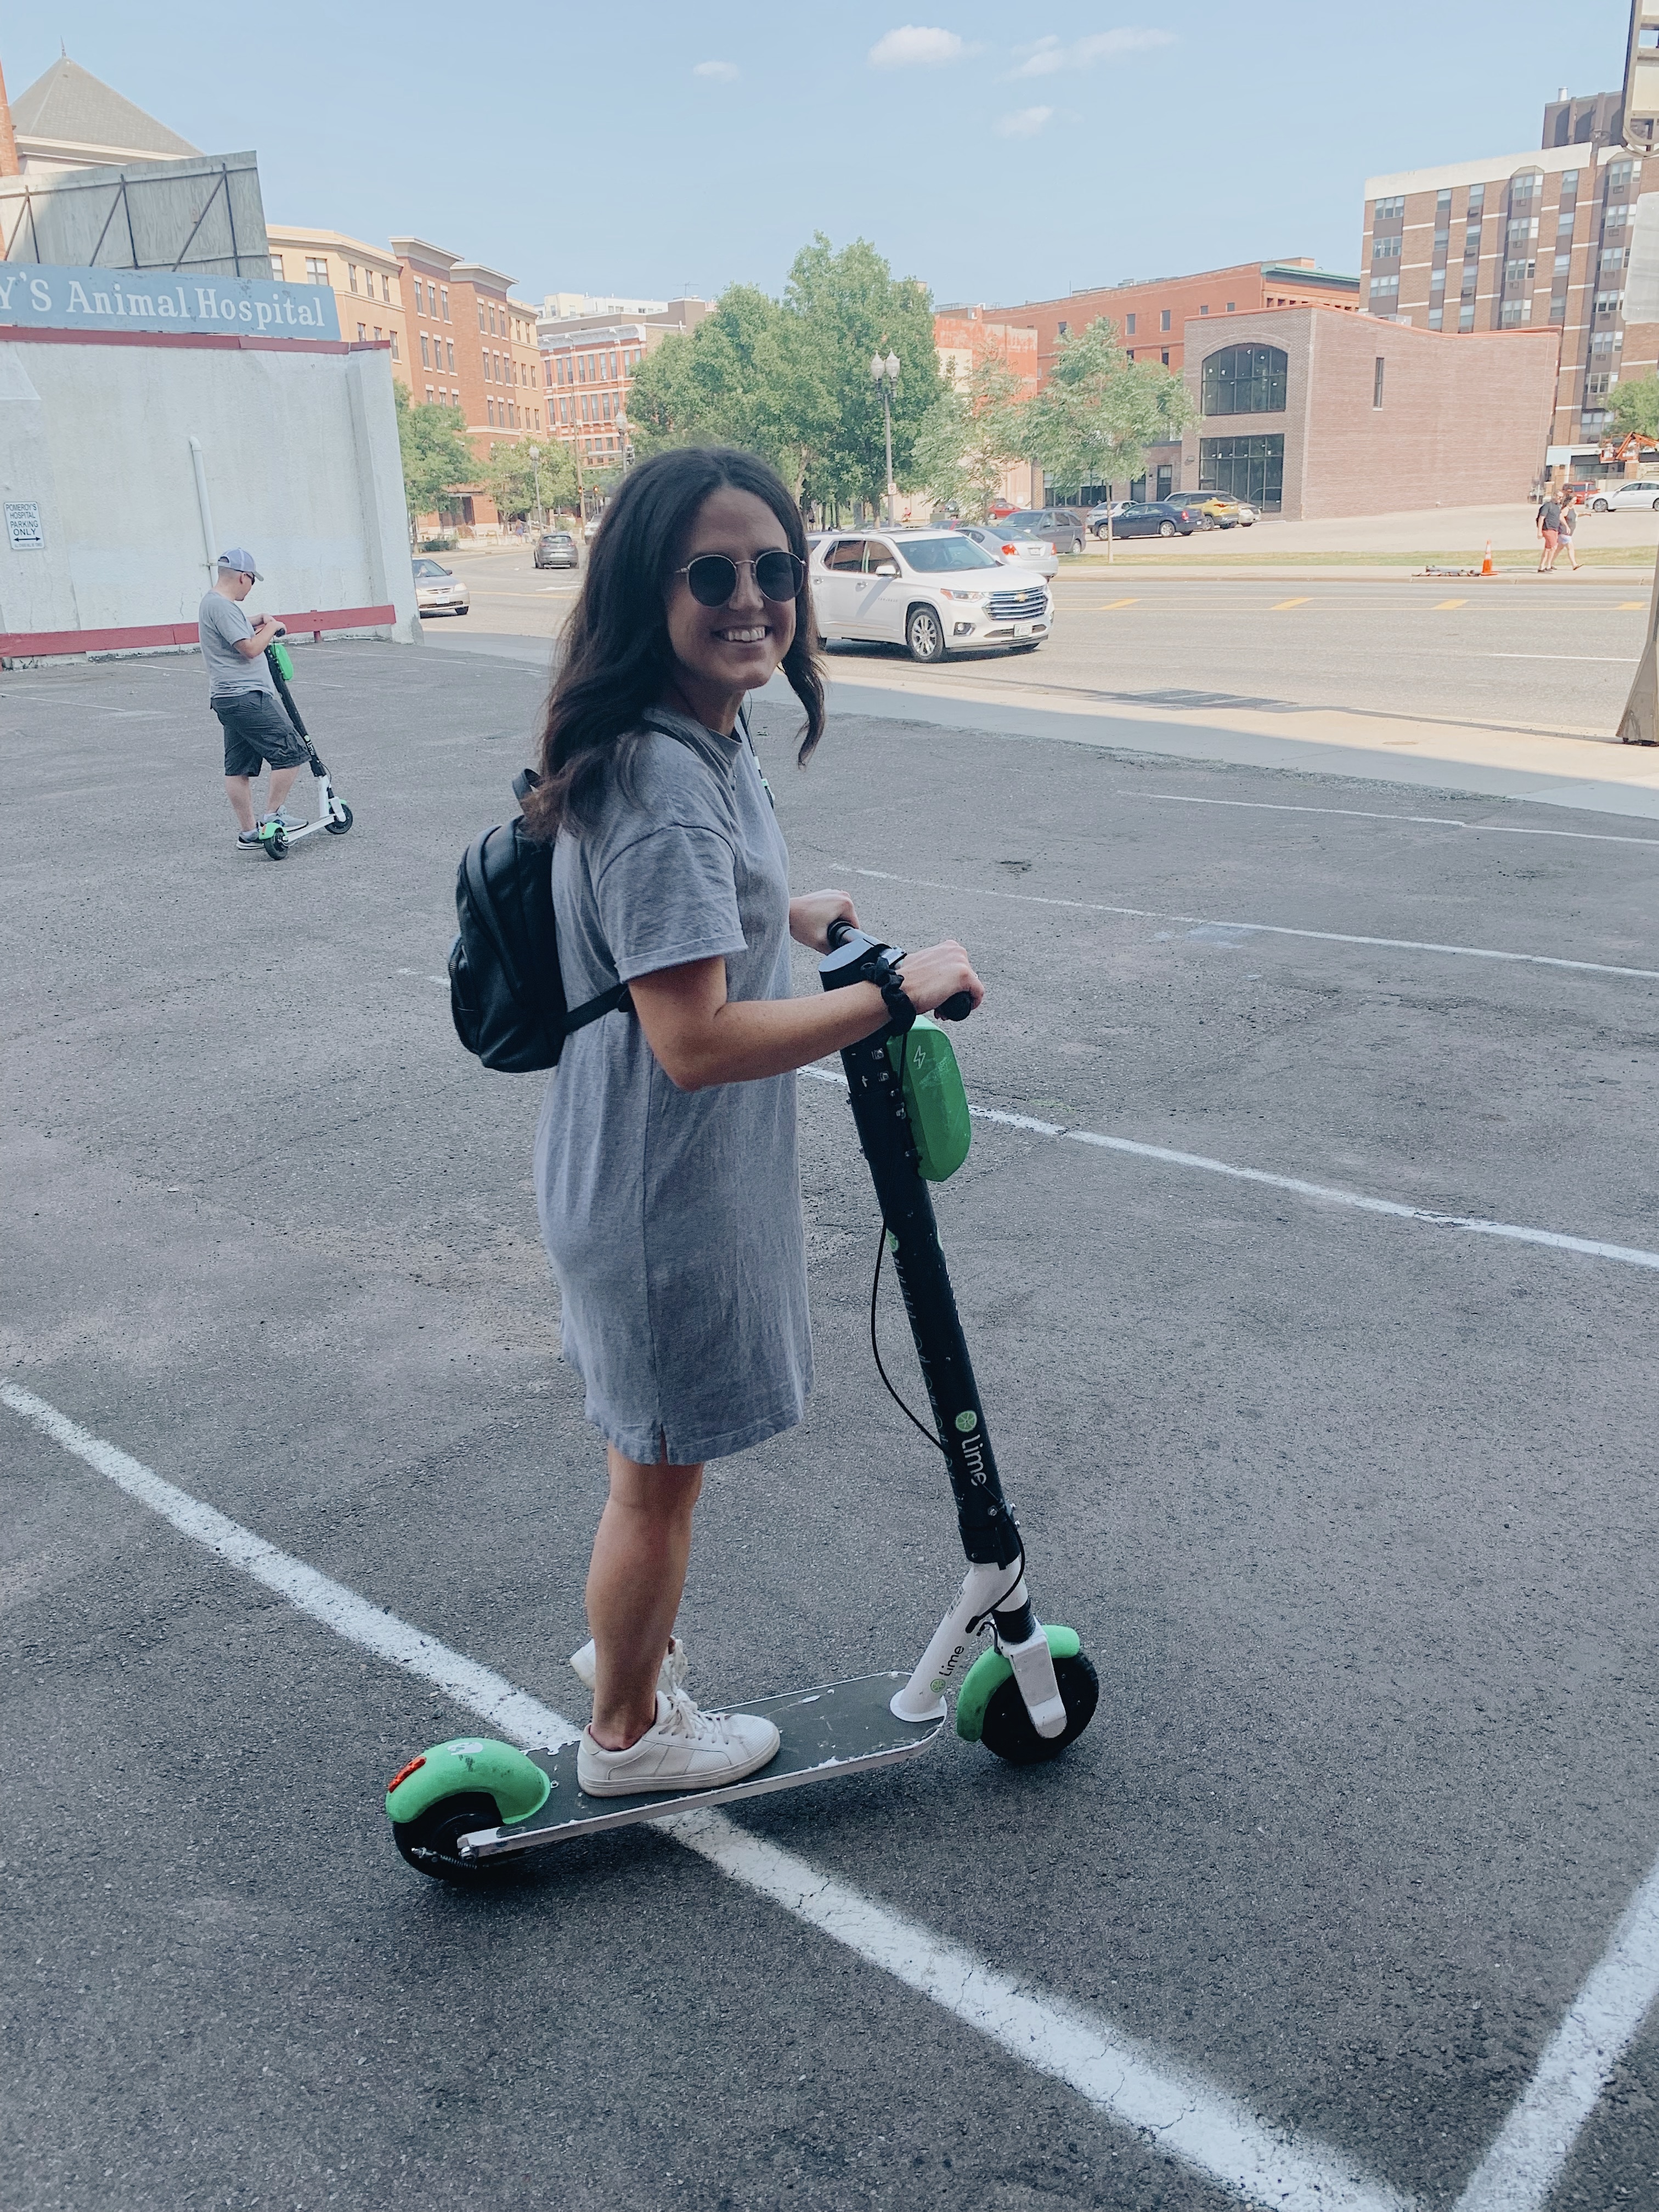 Summer Weekend Fun on a Lime Scooter